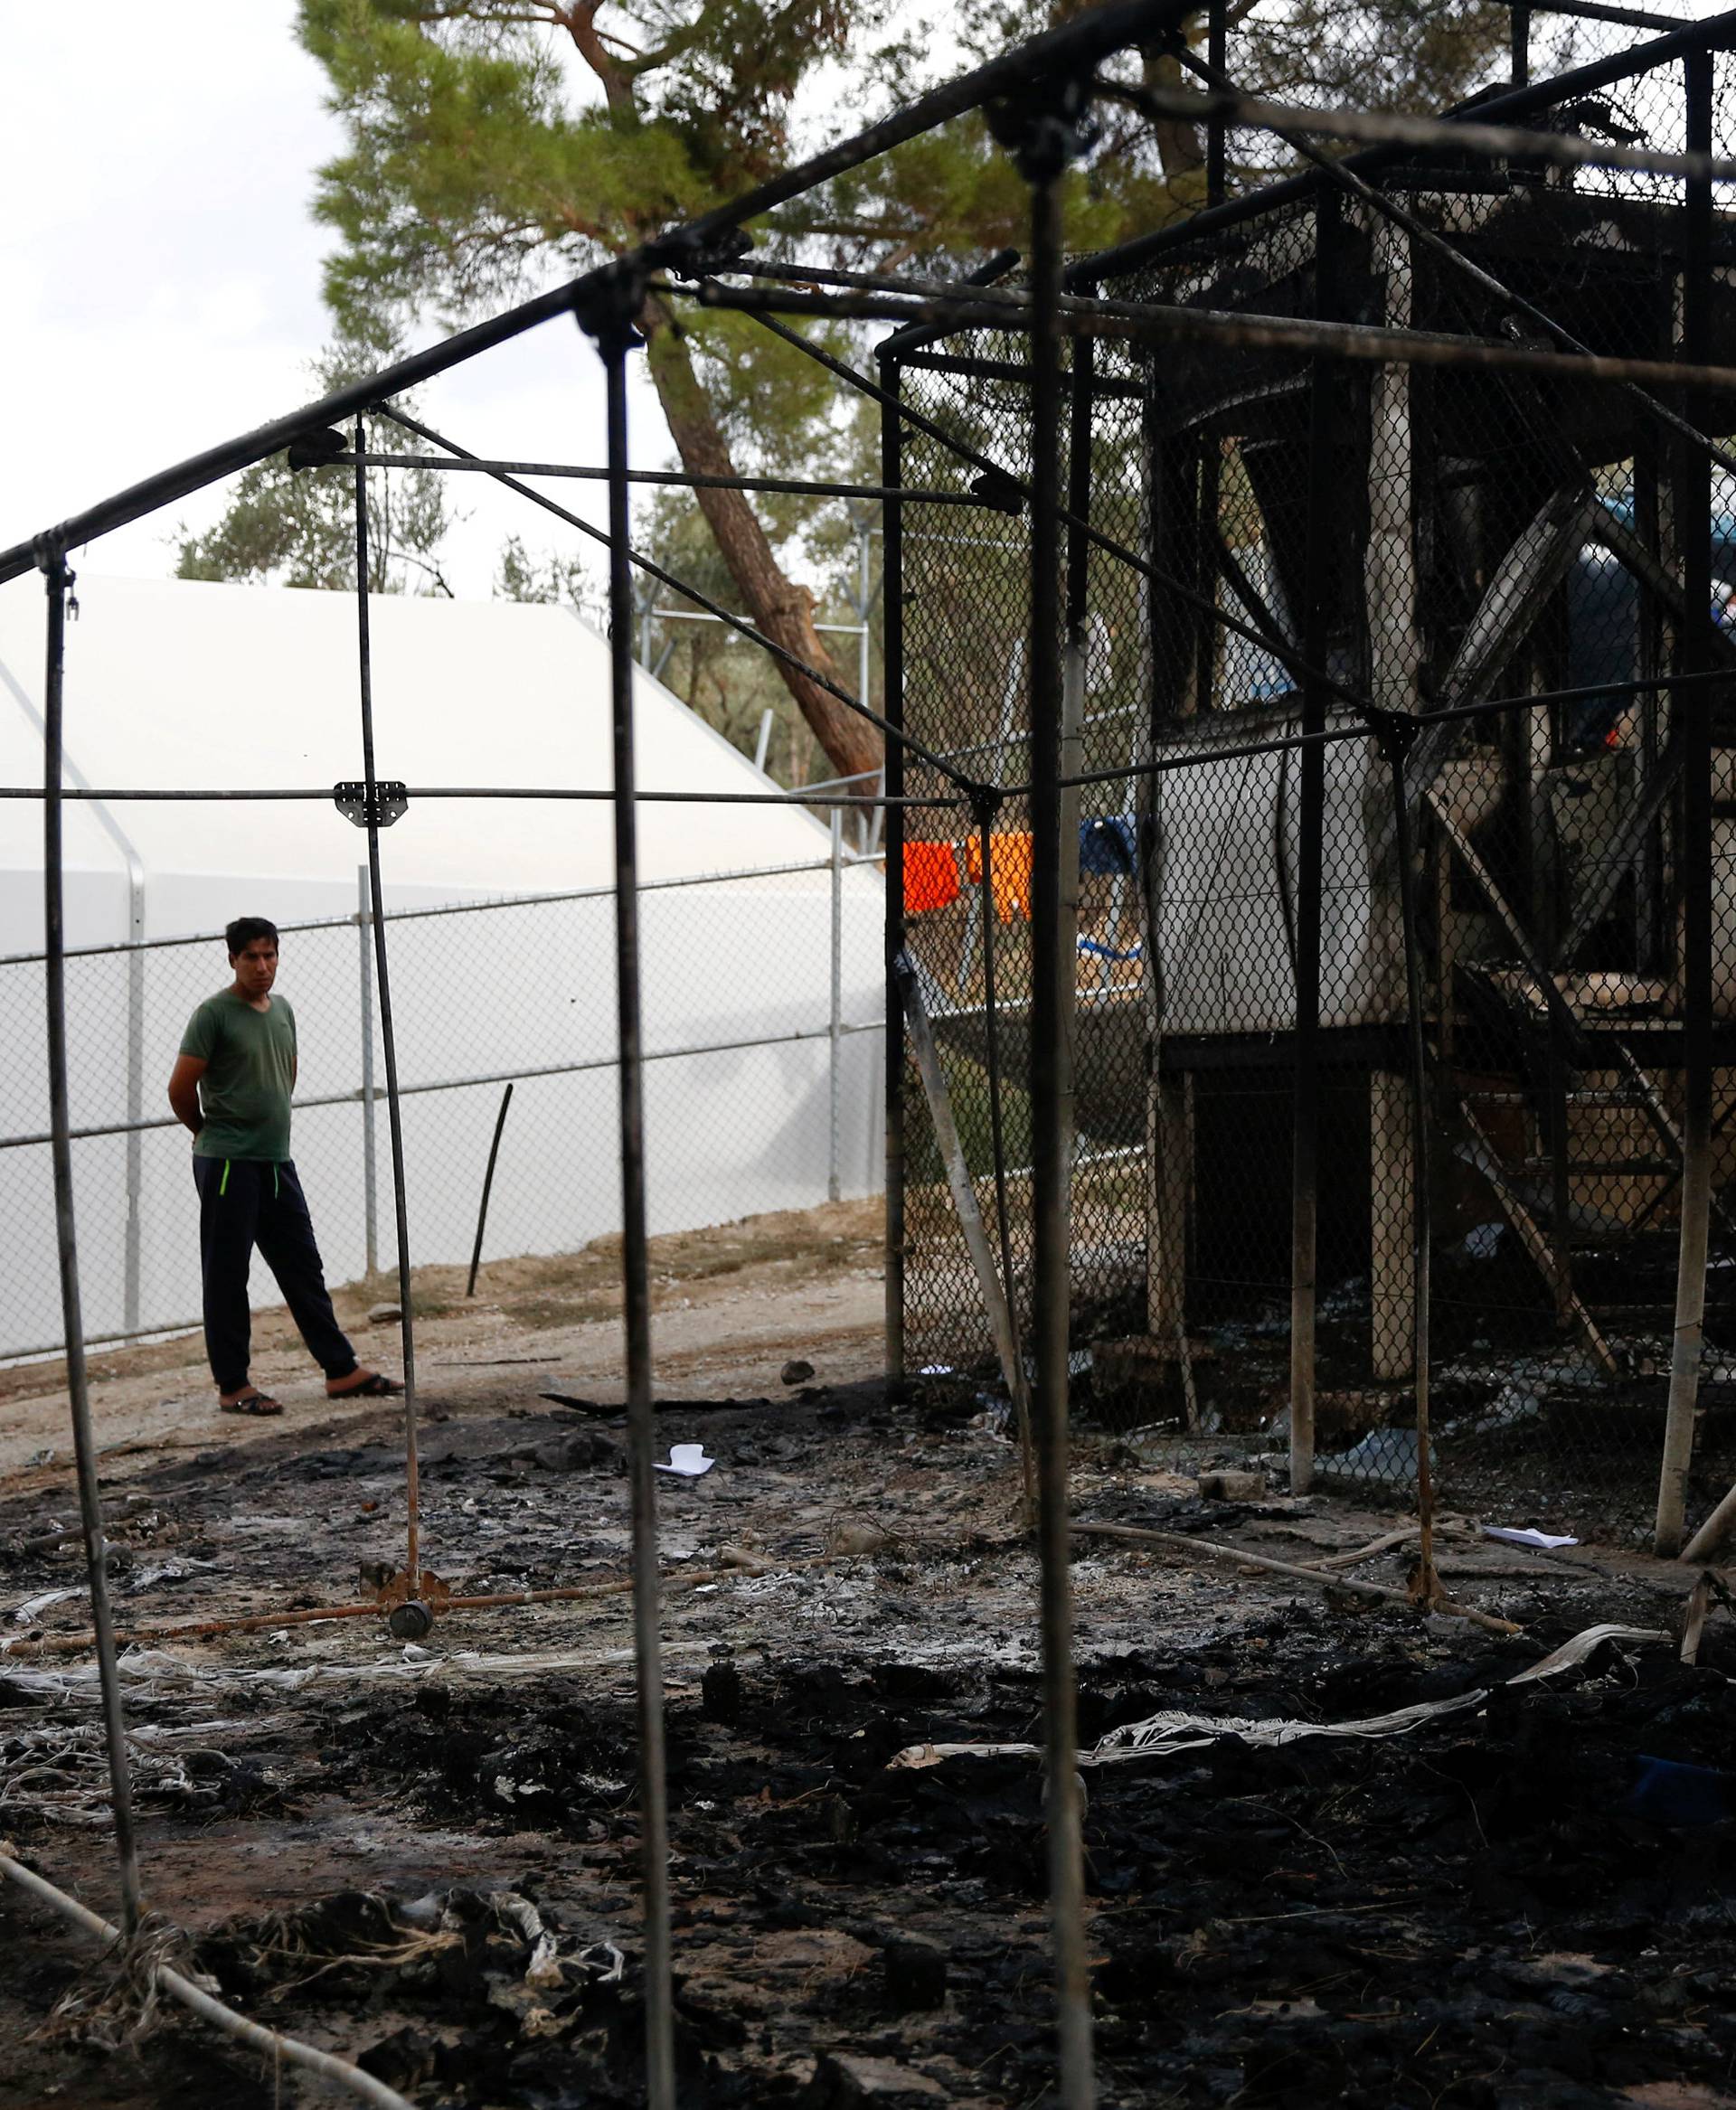 A migrant stands next to a burned tent at the Moria migrant camp, after a fire at the facility, on the island of Lesbos